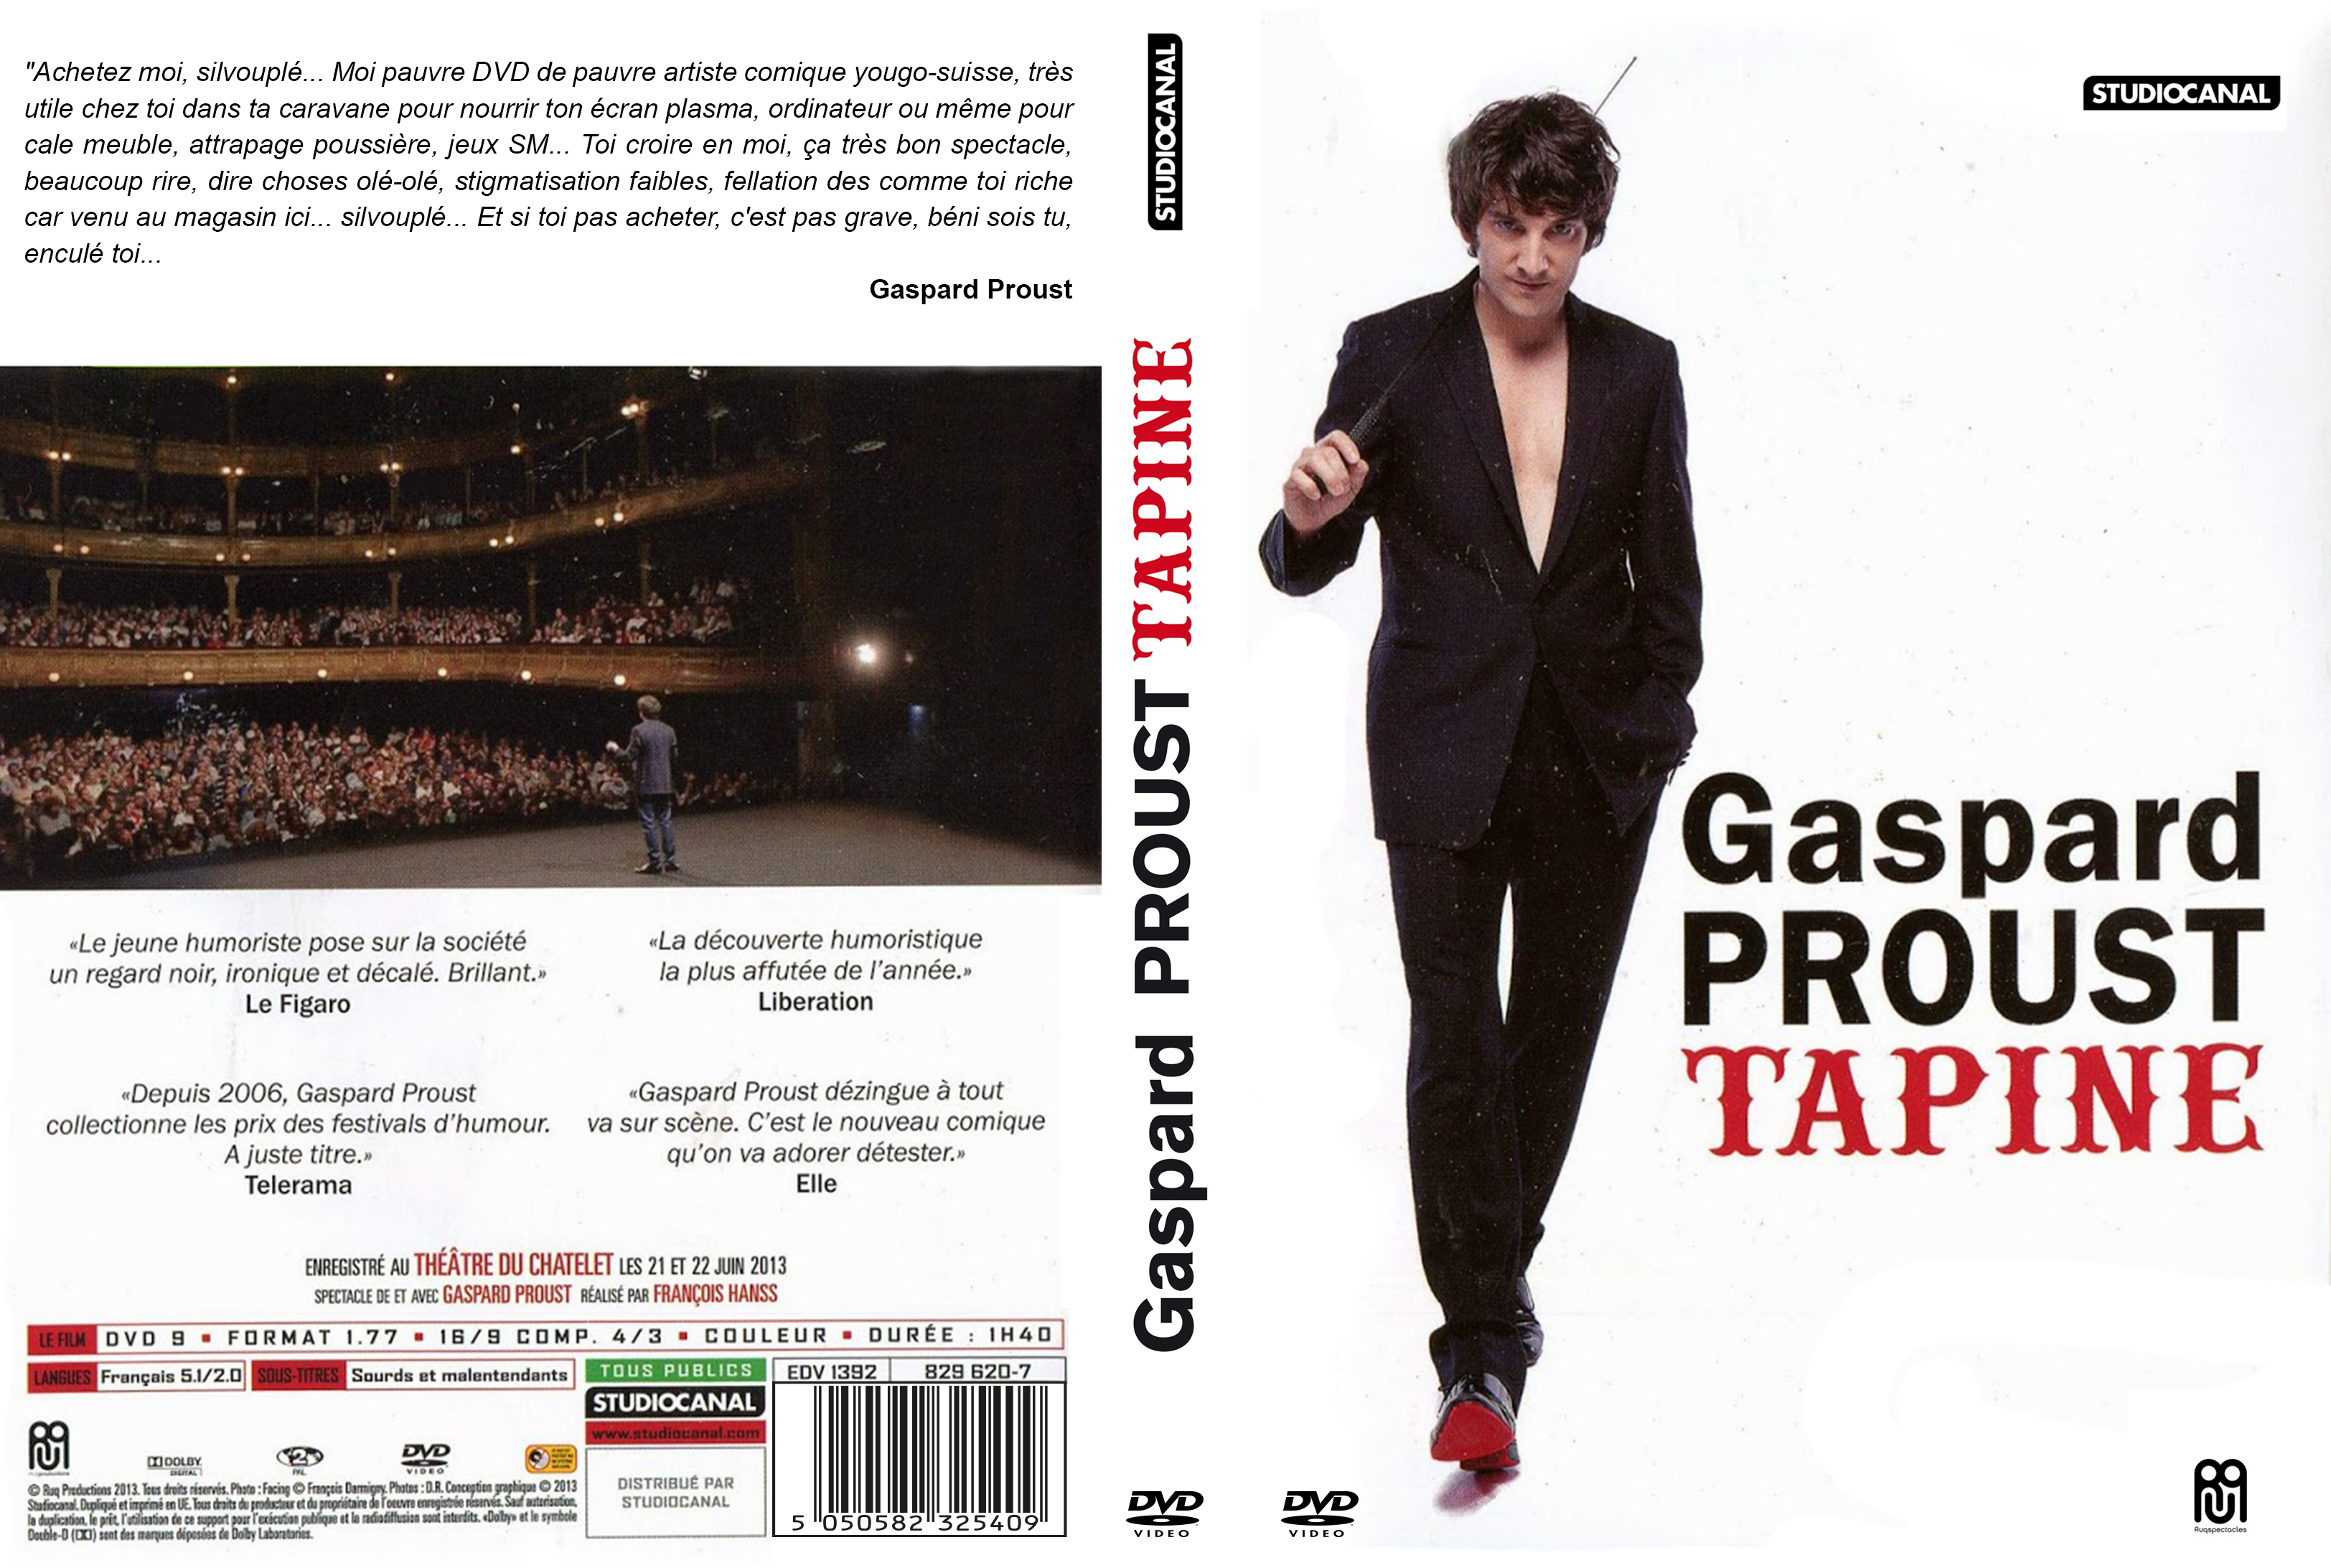 Jaquette DVD Gaspard Proust - Tapine